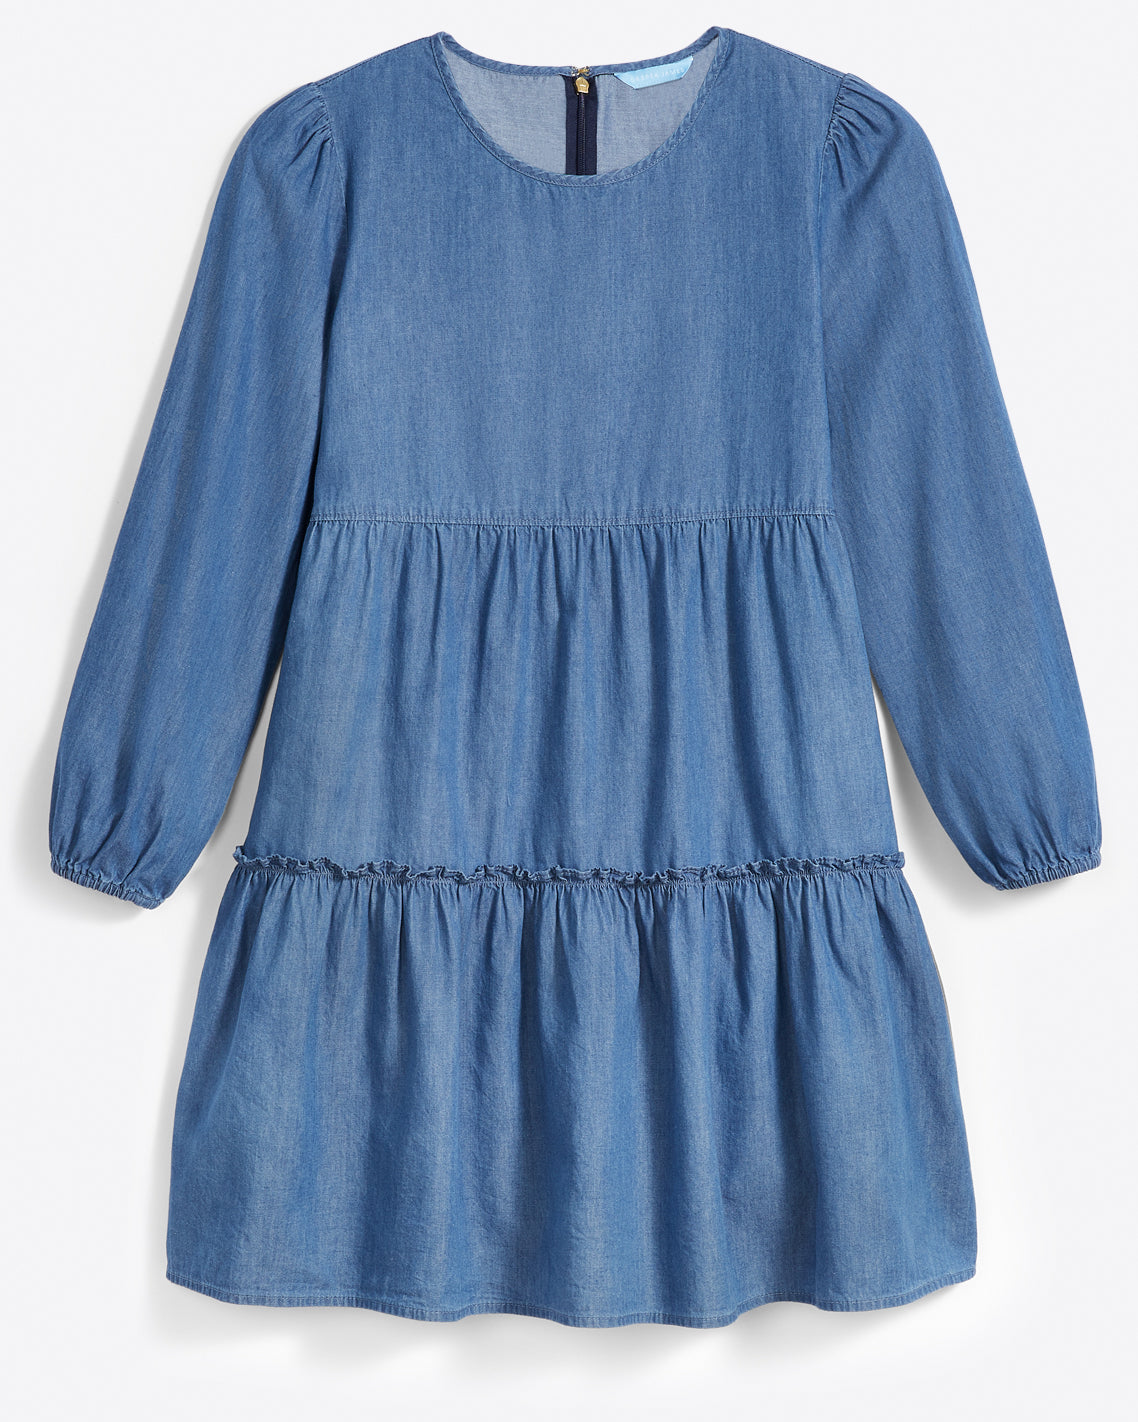 Tiered Trapeze Dress in Chambray